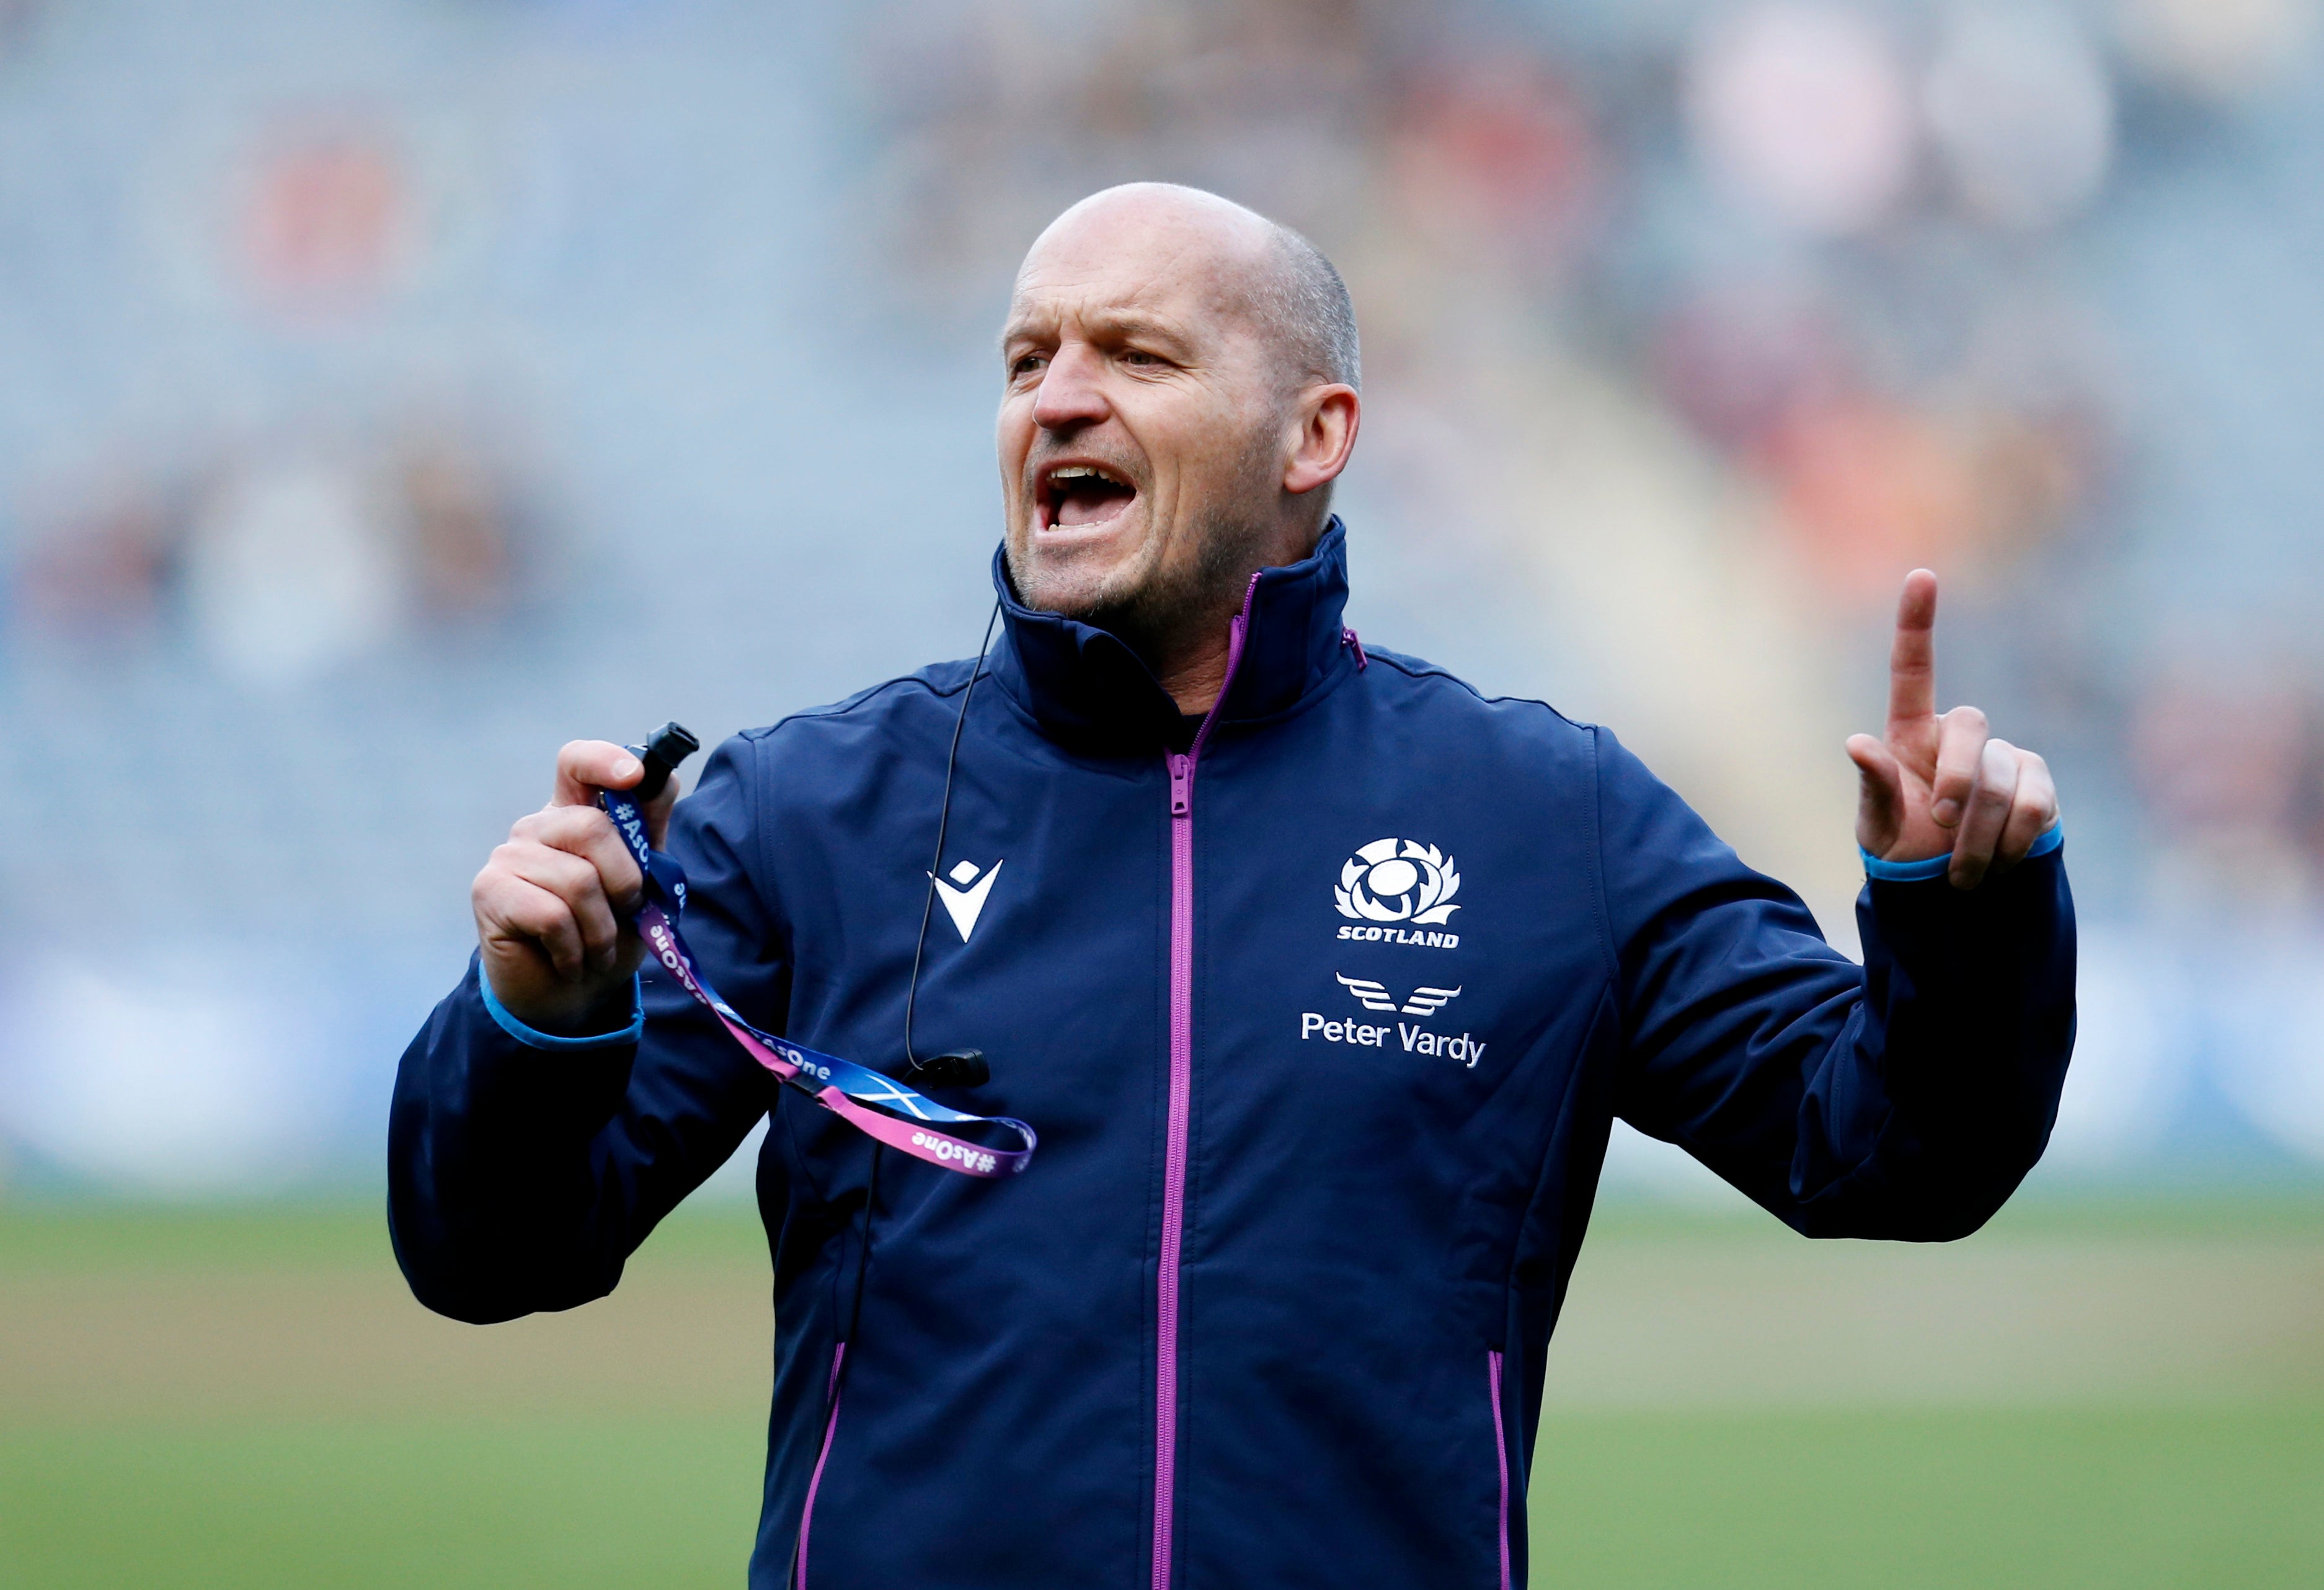 Scotland ended their autumn campaign with a 29-20 win over Japan